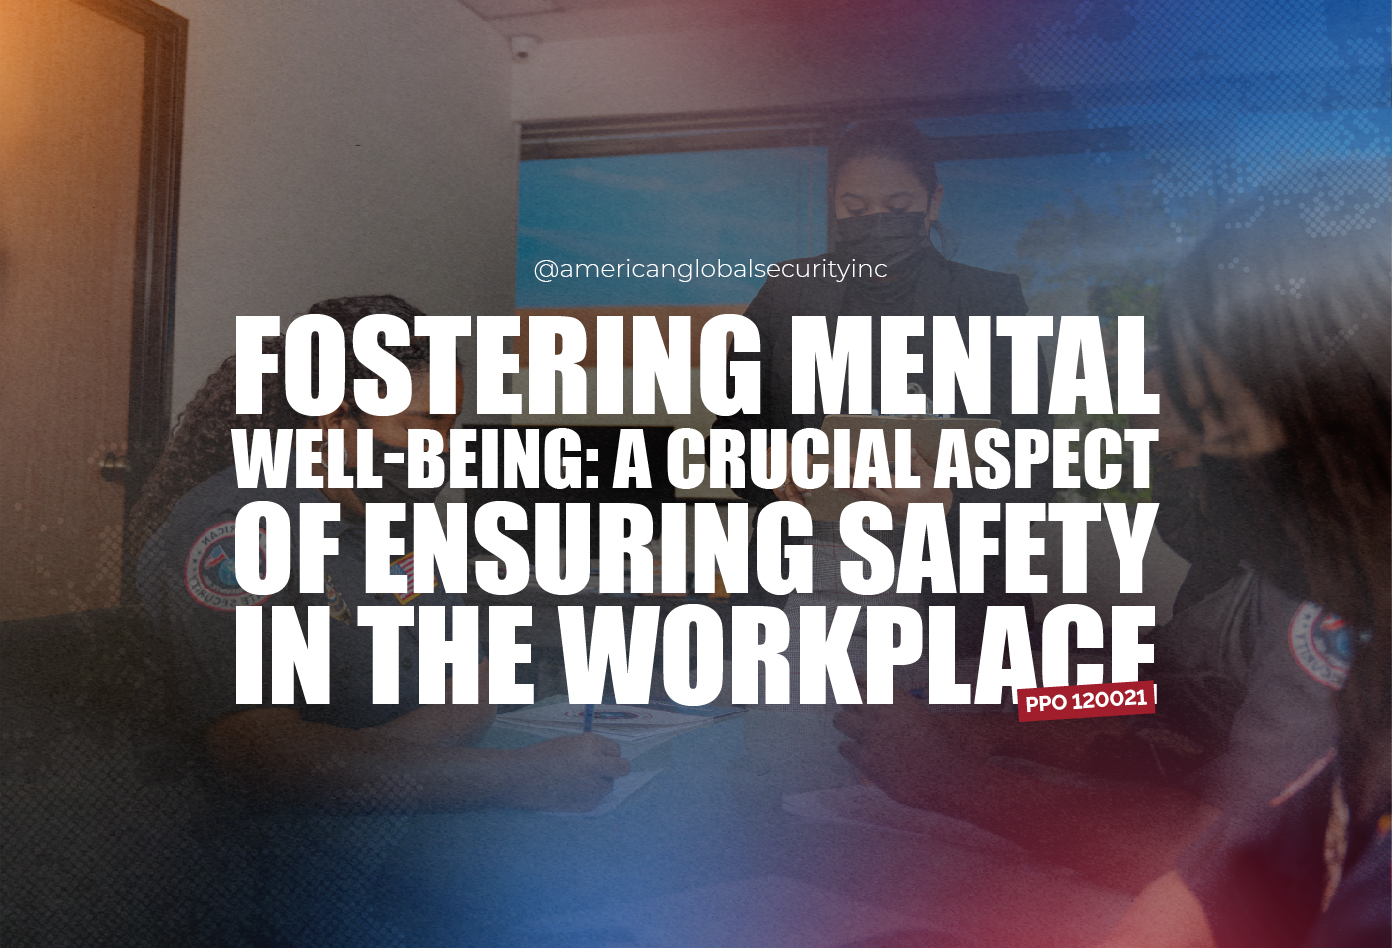 Fostering Mental Well-being: A Crucial Aspect of Ensuring Safety in the Workplace